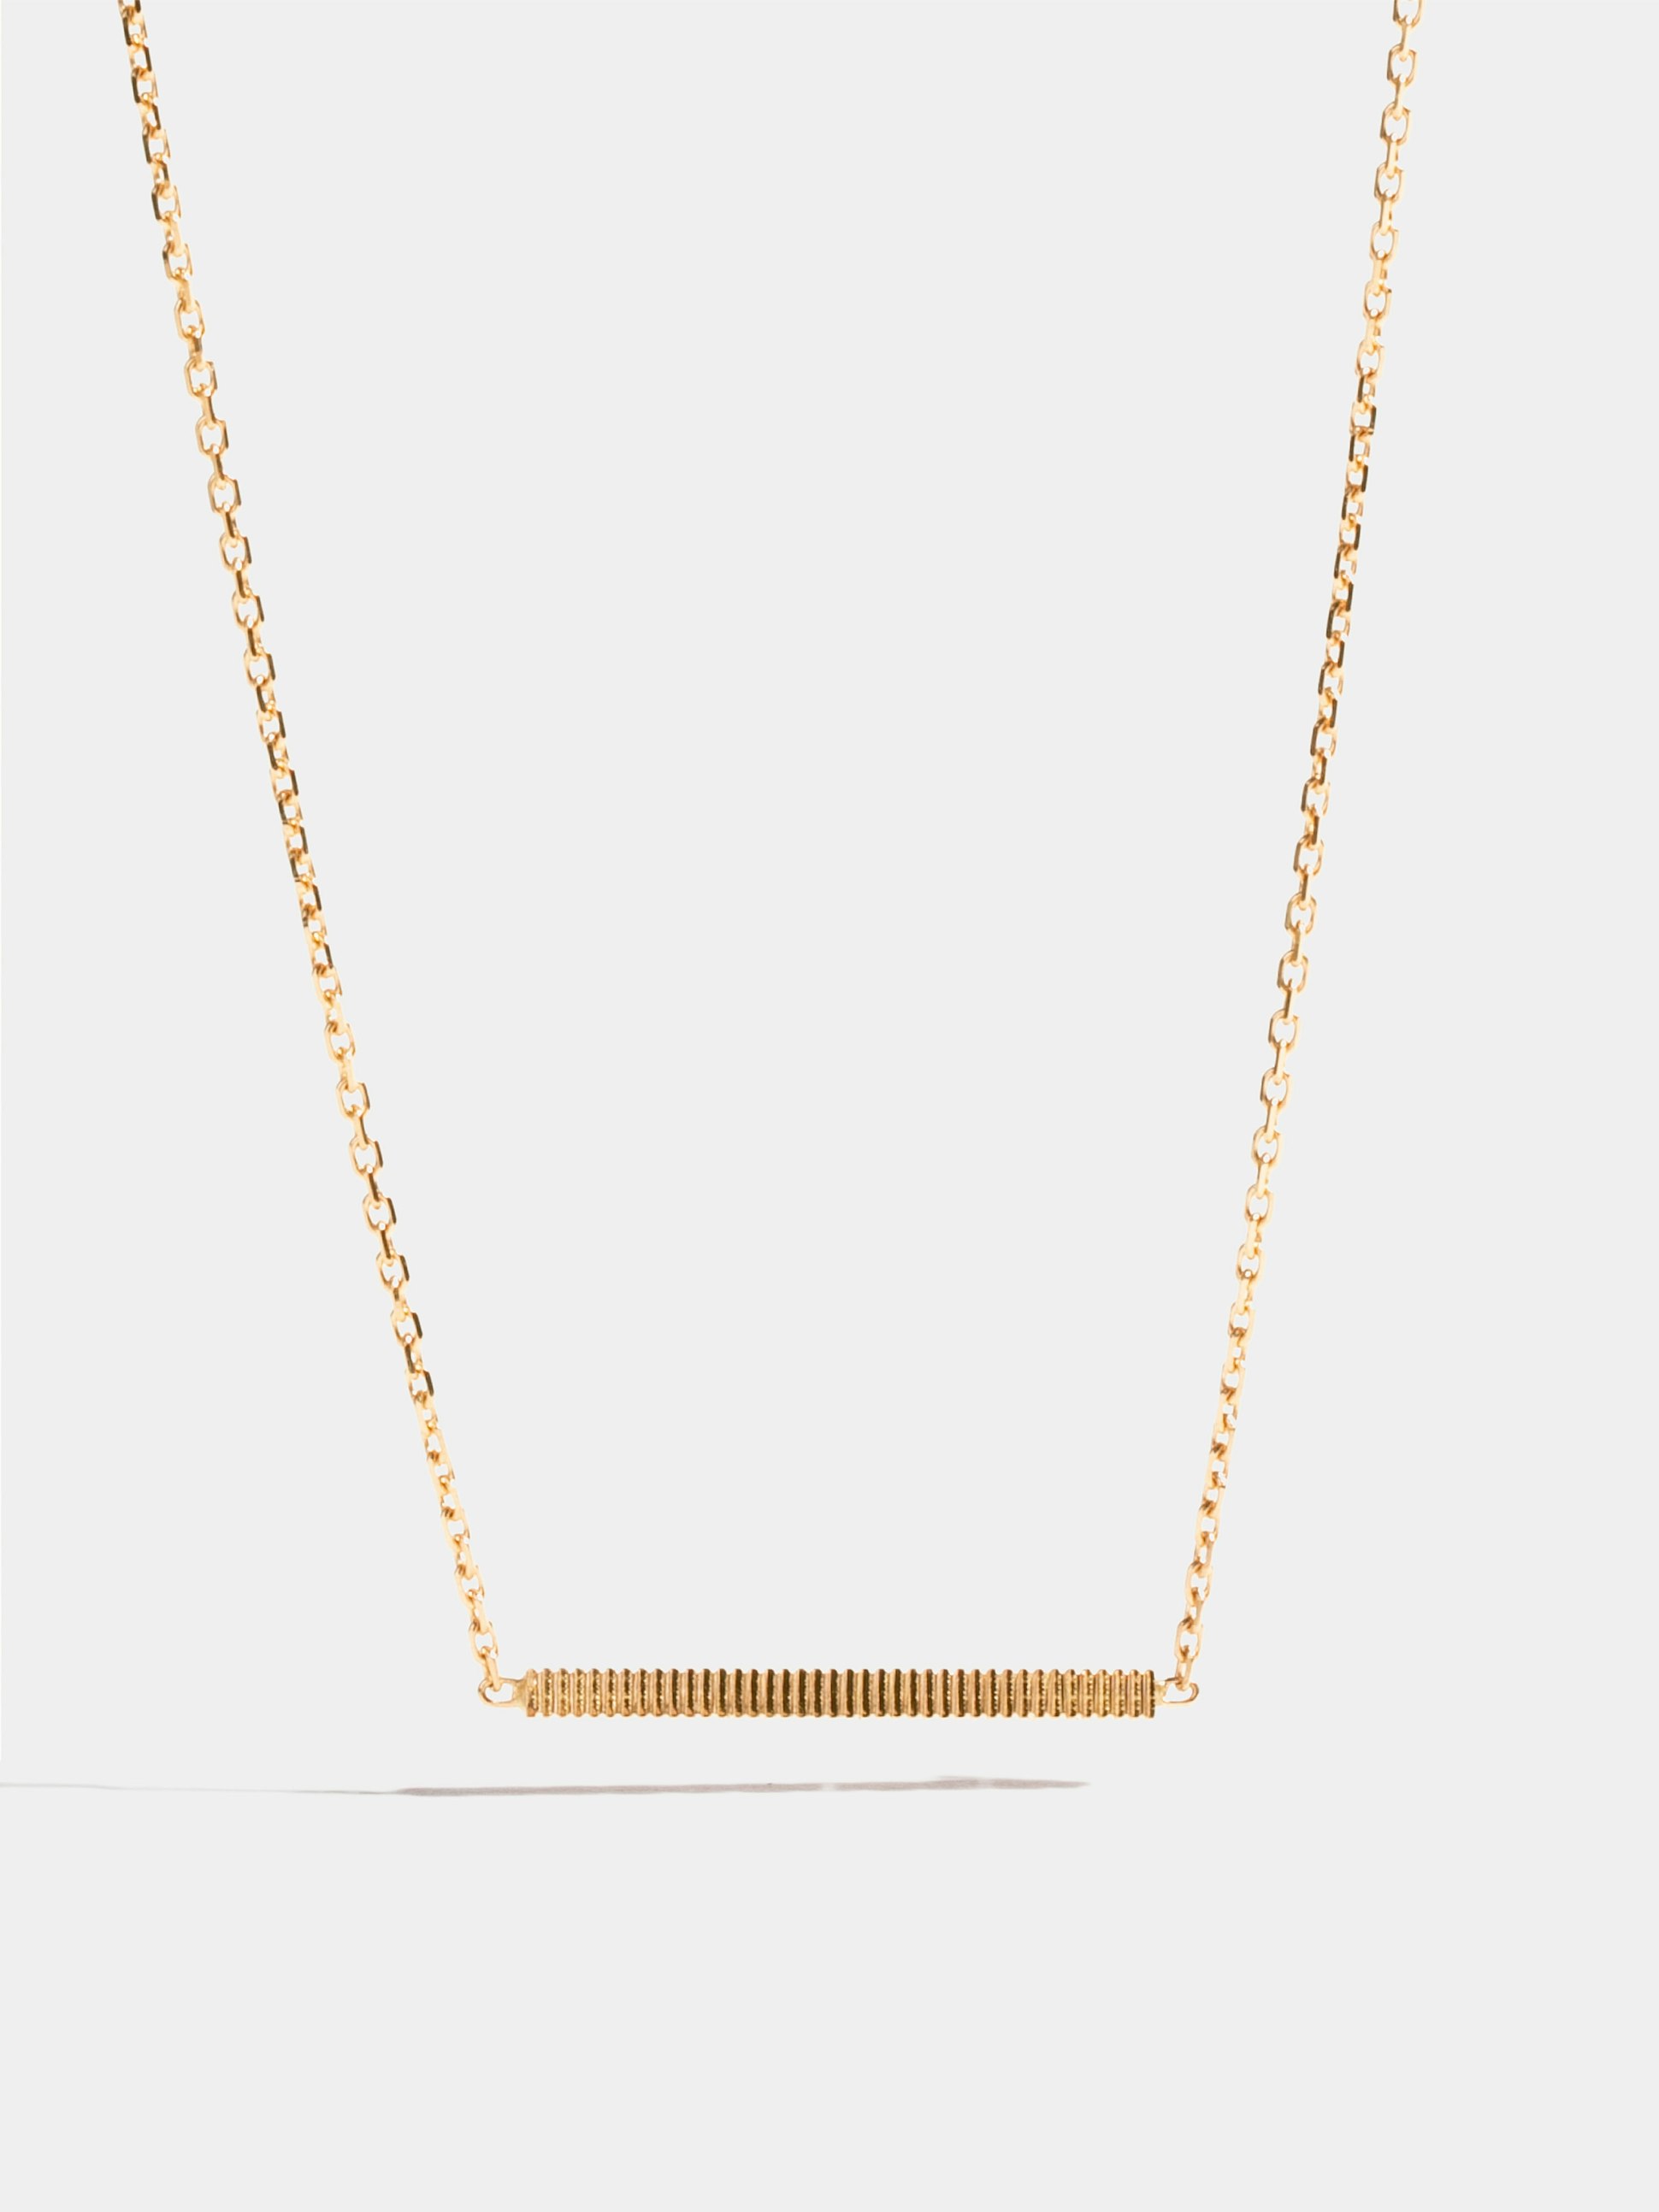 Motif Anagramme ridges in yellow gold 18k Fairmined ethical, on 42 cm chain